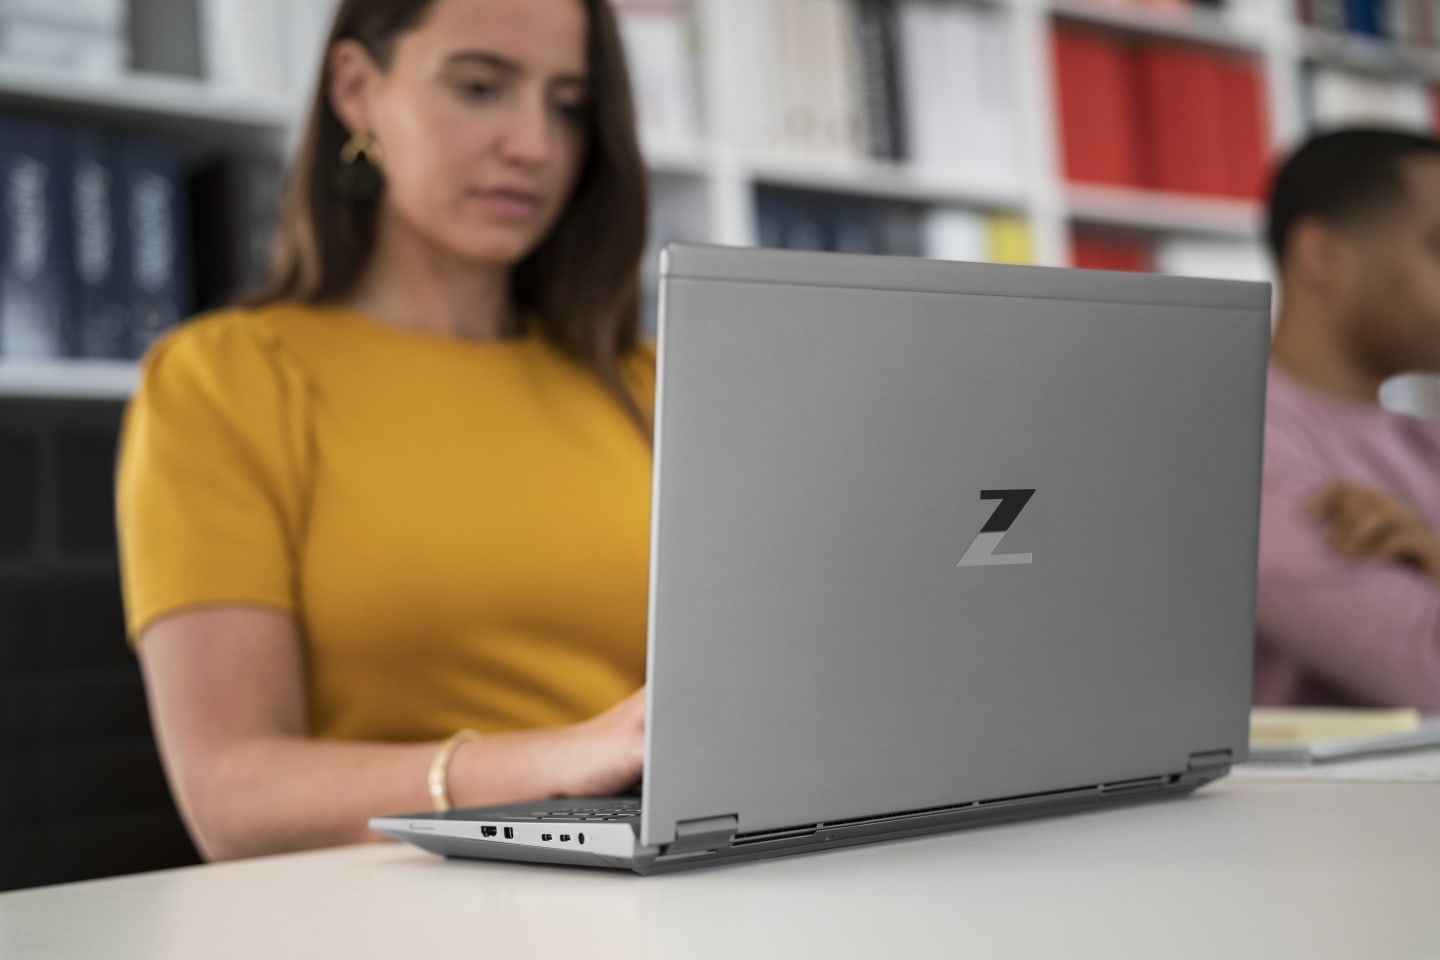 HP’s Z Series of Laptops and Workstations Are Now Certified with Ubuntu 20.04 LTS